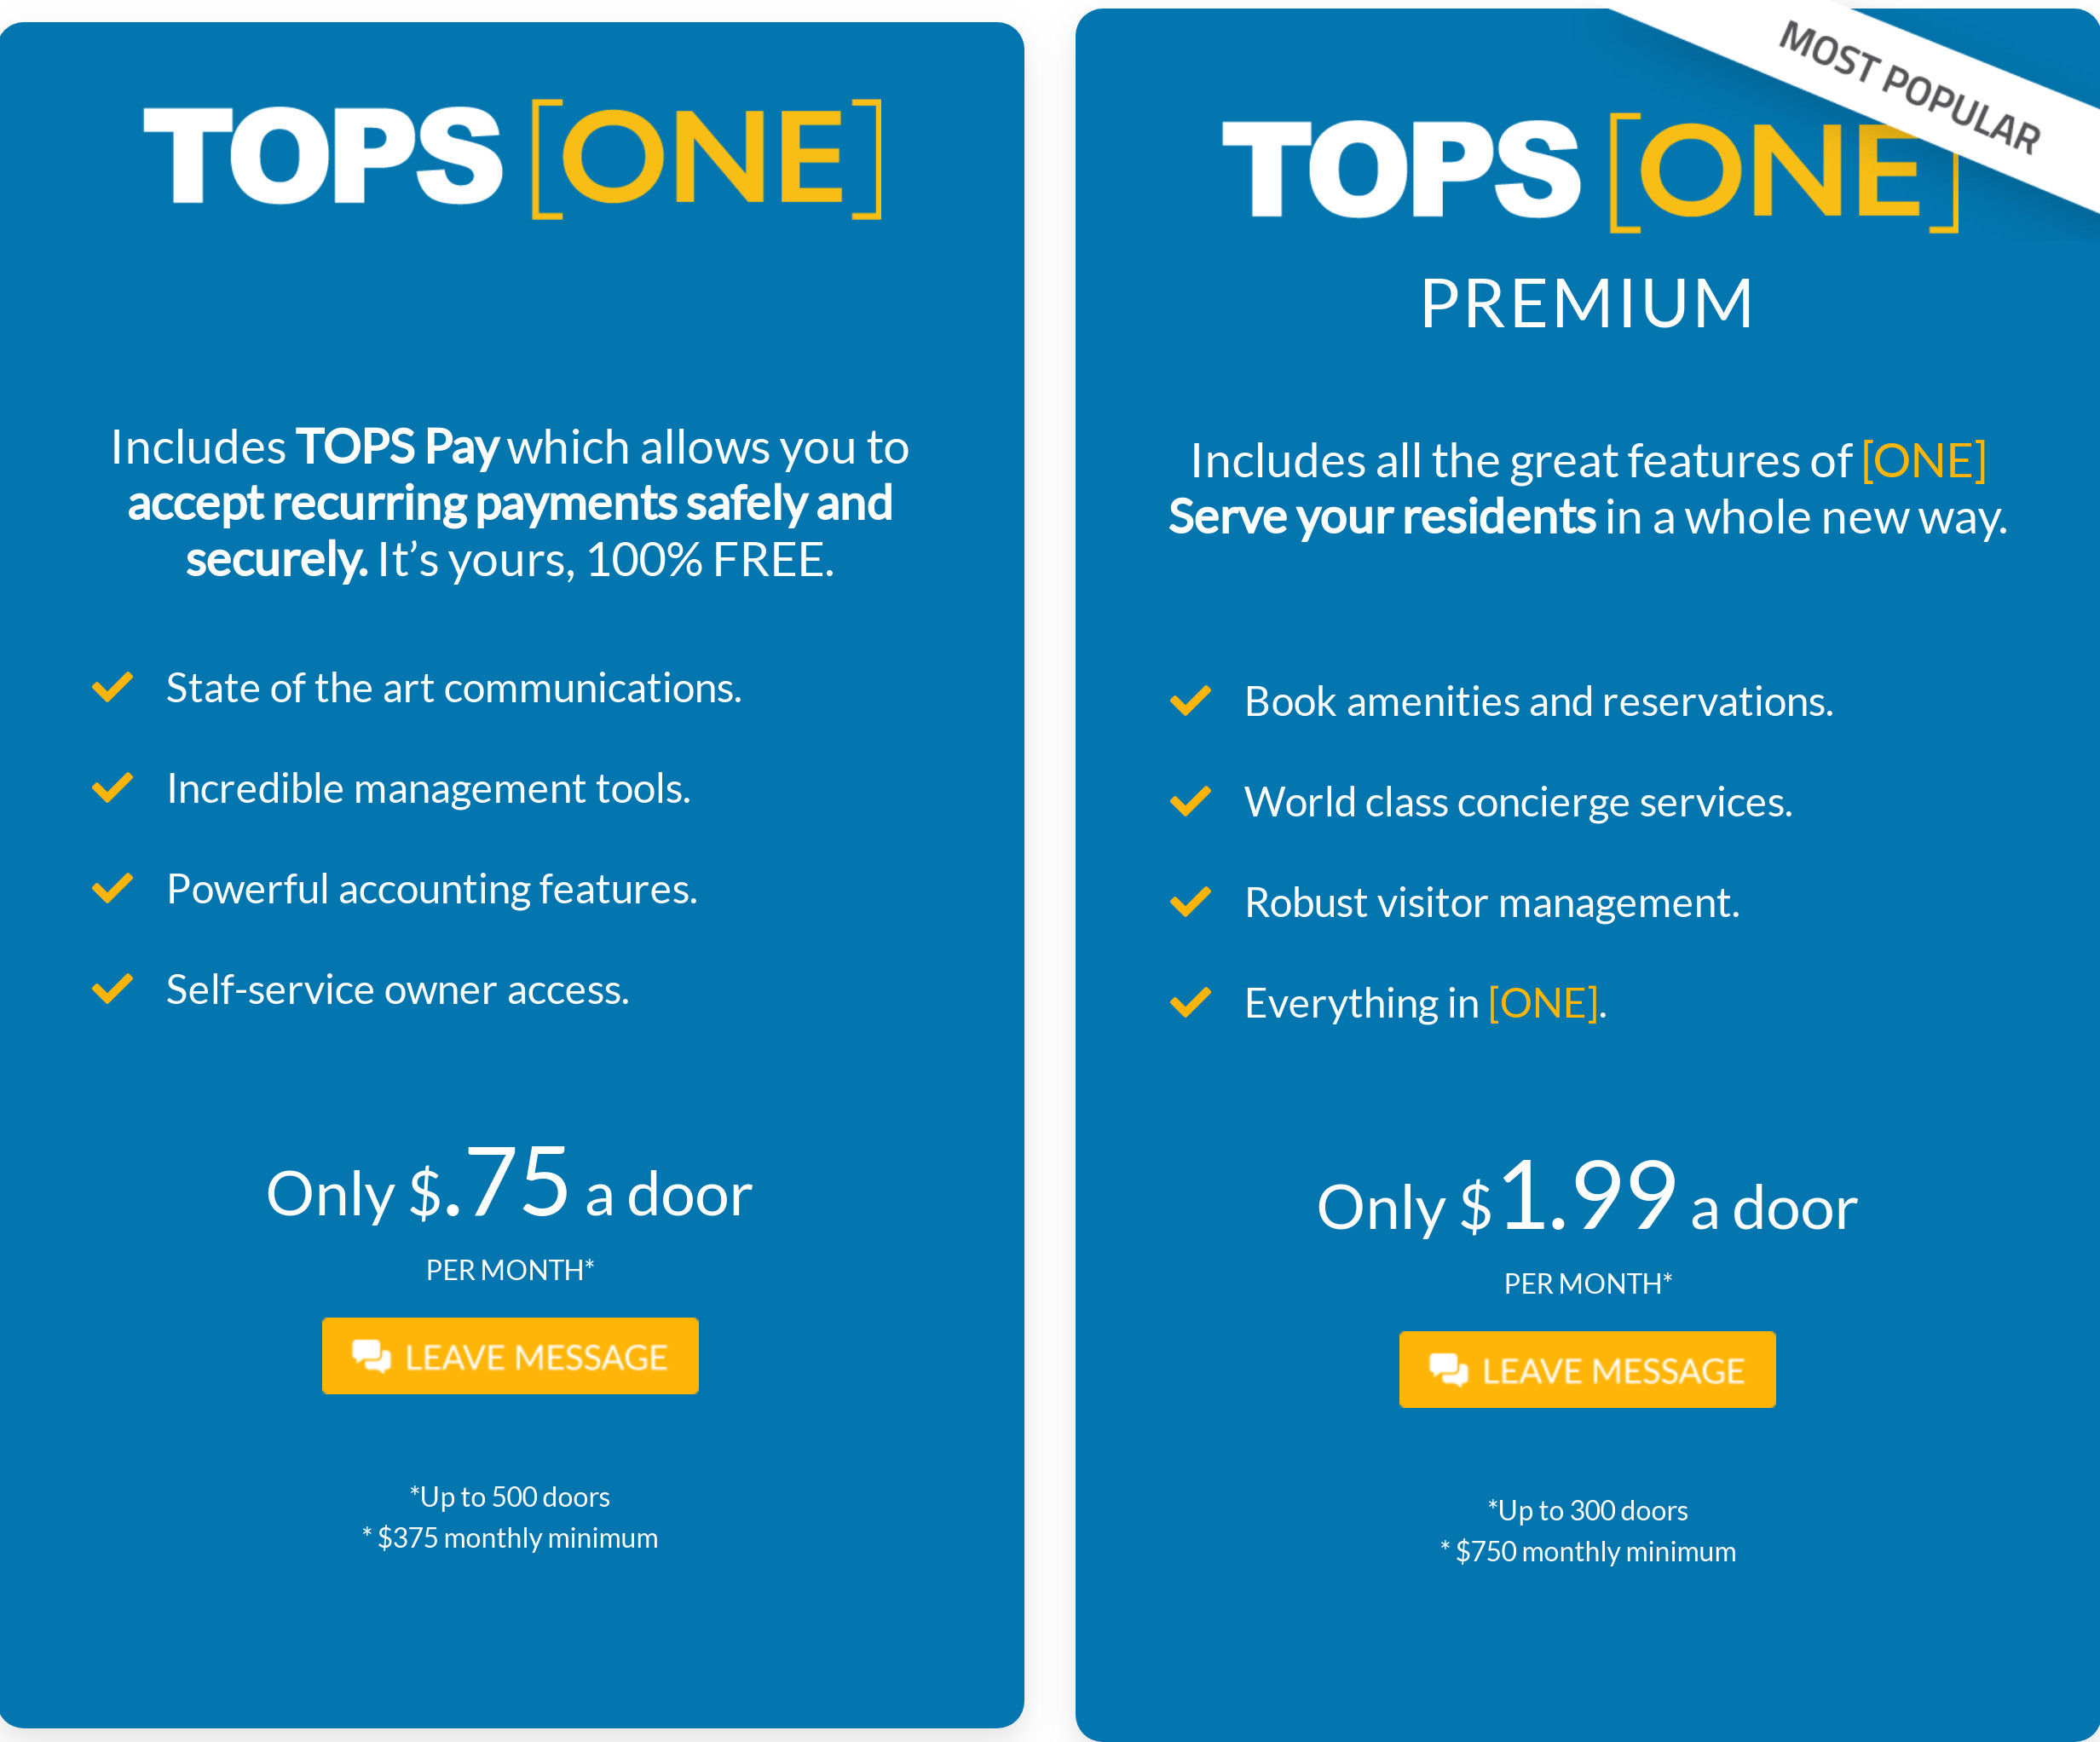 TOPS [ONE] Pricing, Reviews and Features (May 2021) - SaaSworthy.com